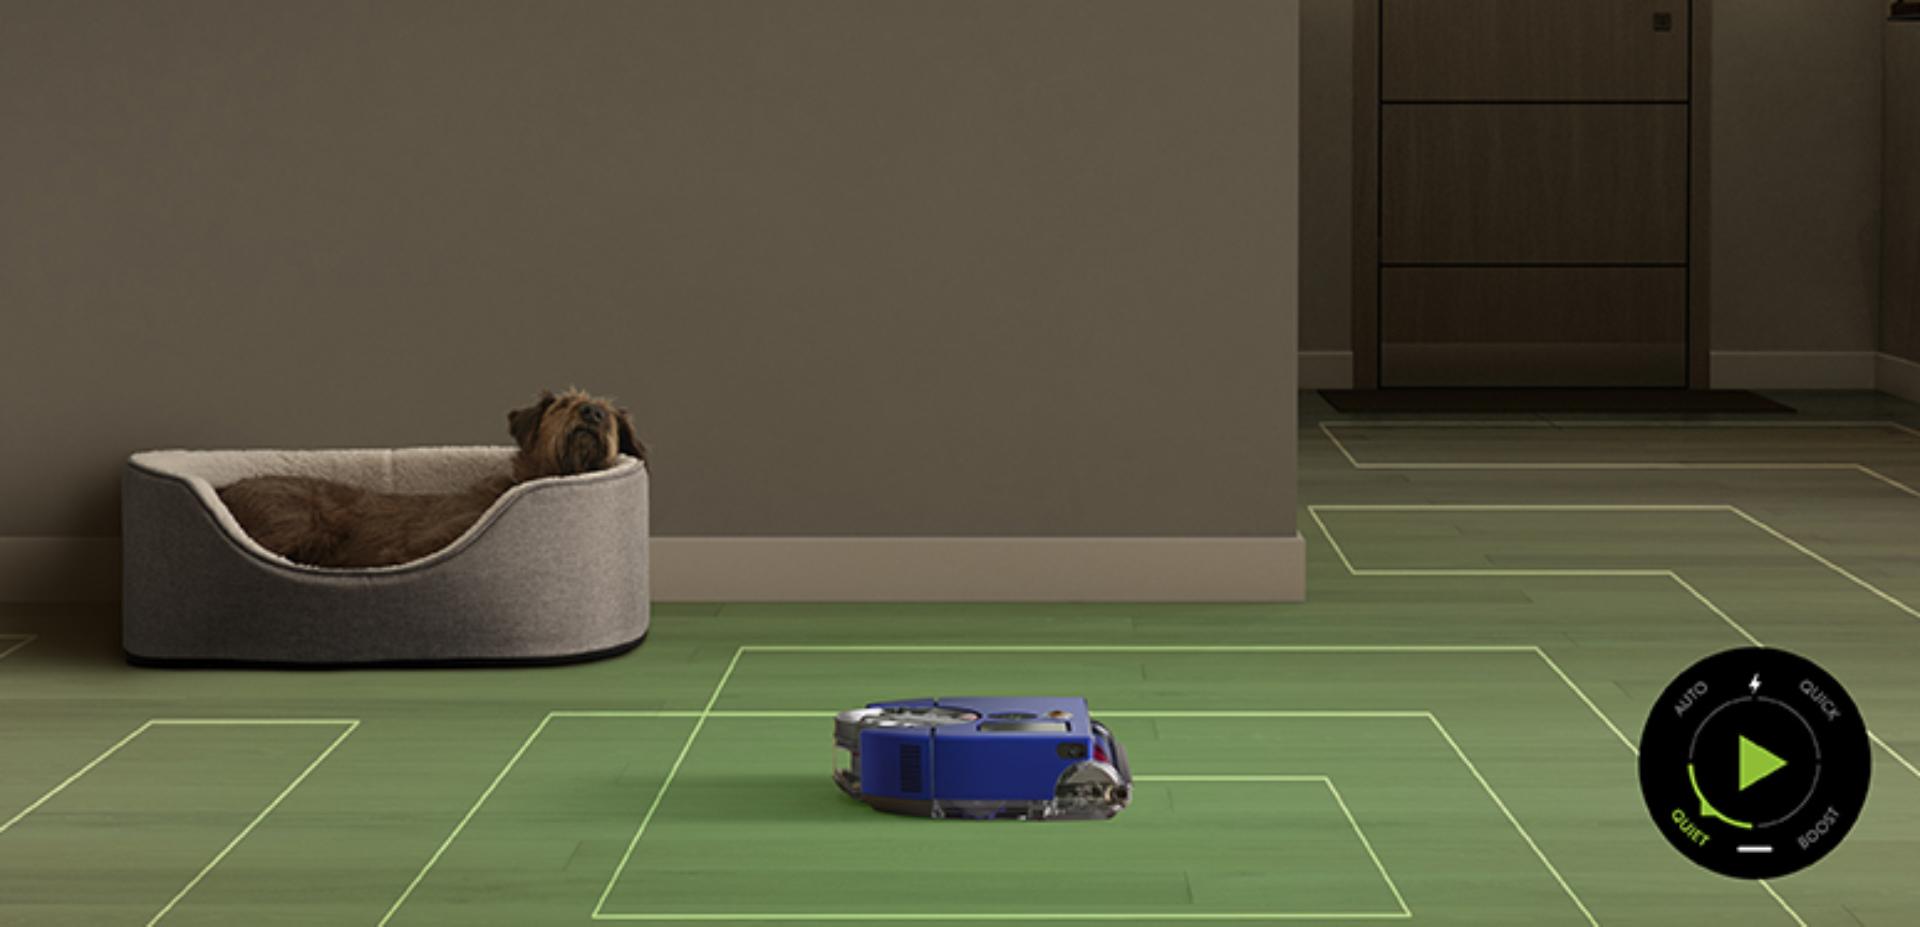 The robot vacuum cleaning an area where a pet is sleeping